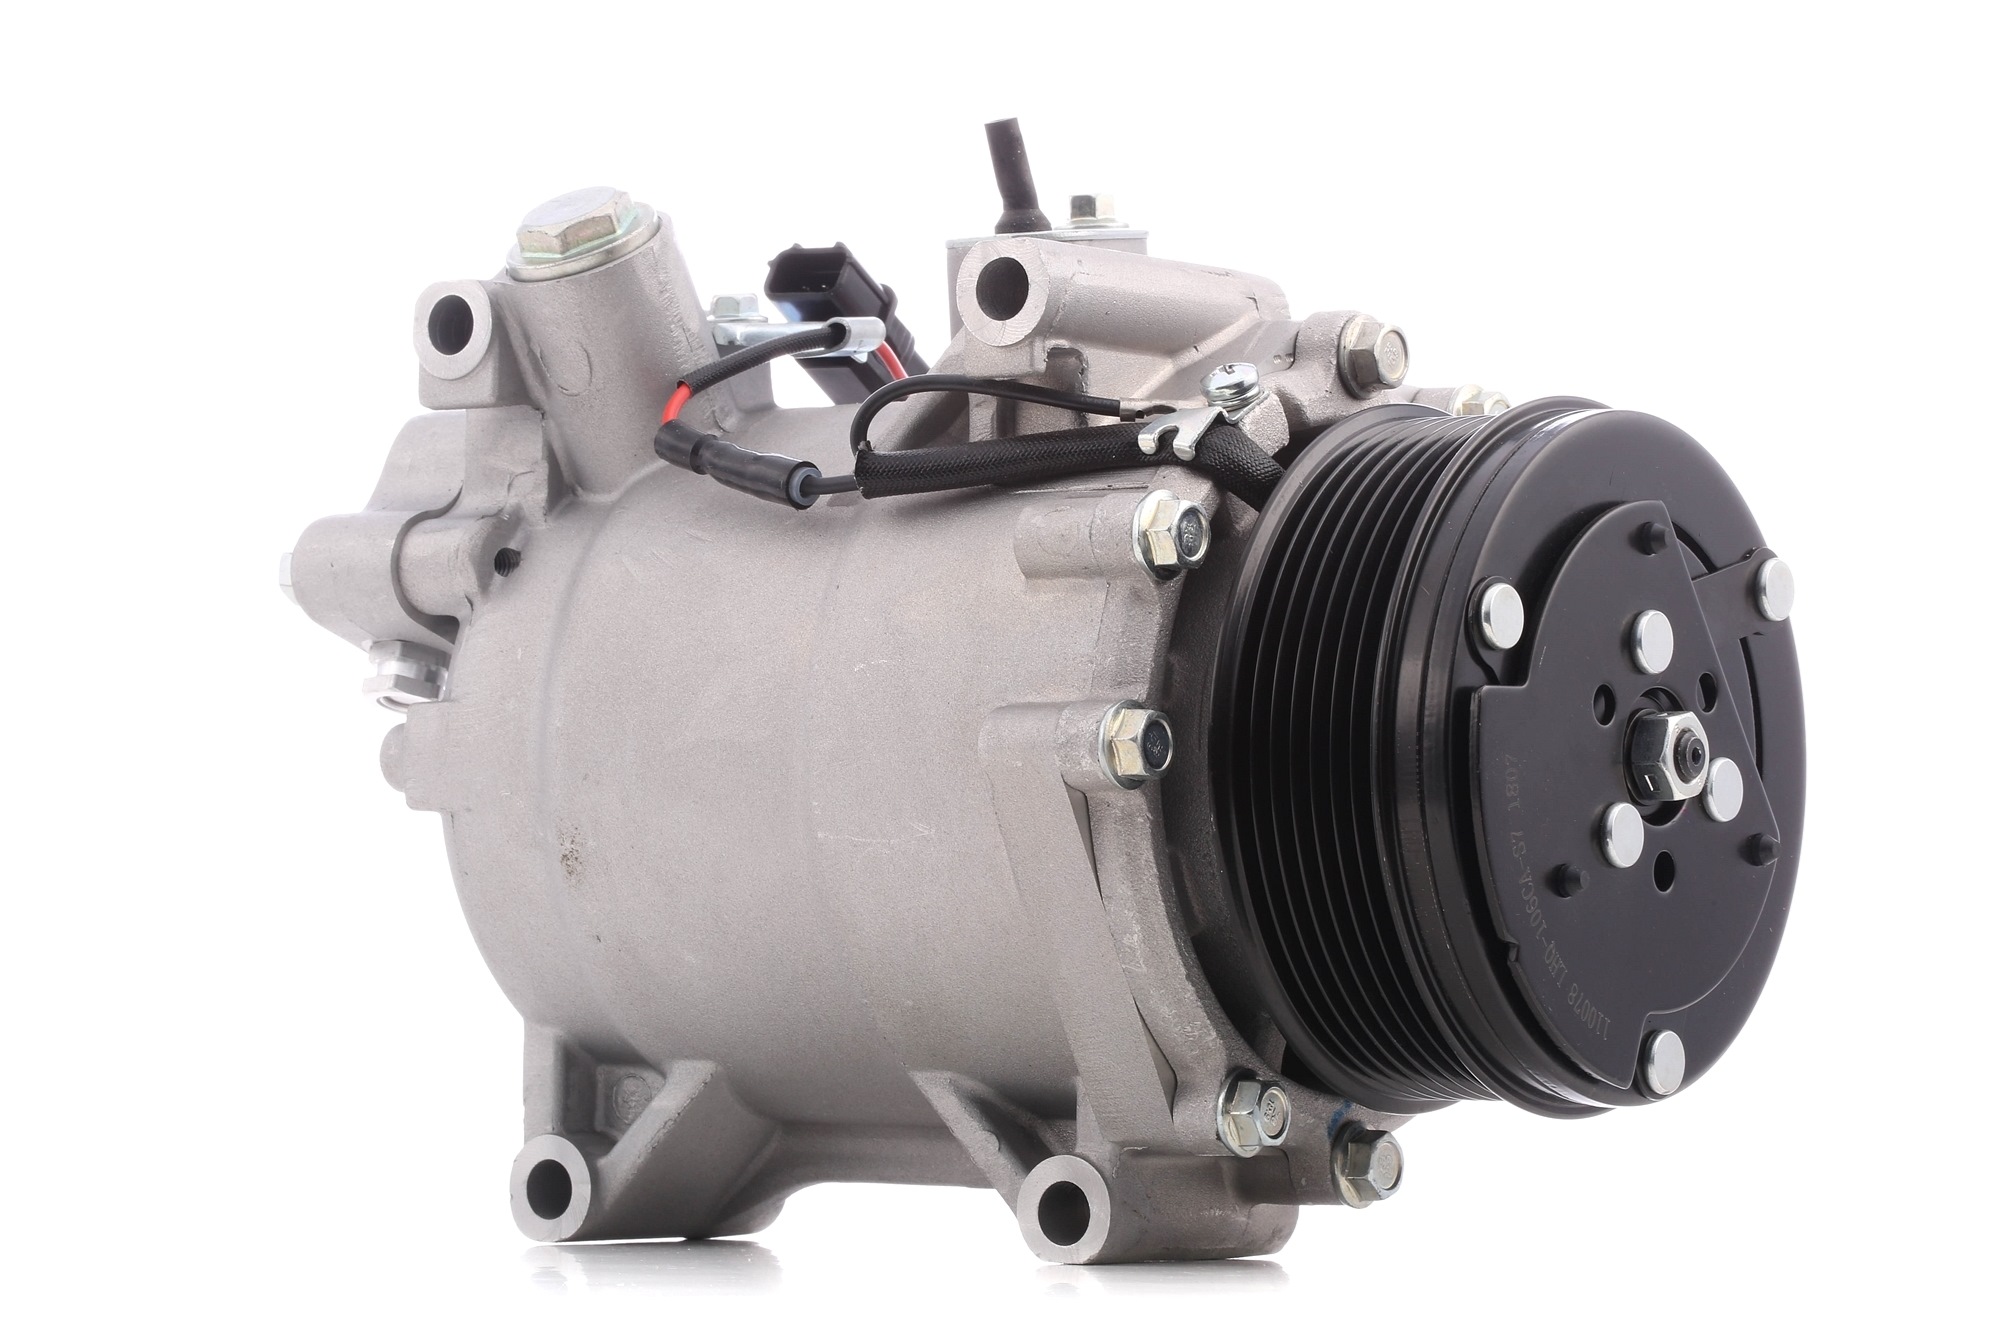 STARK SKKM-0340371 Air conditioning compressor HONDA experience and price